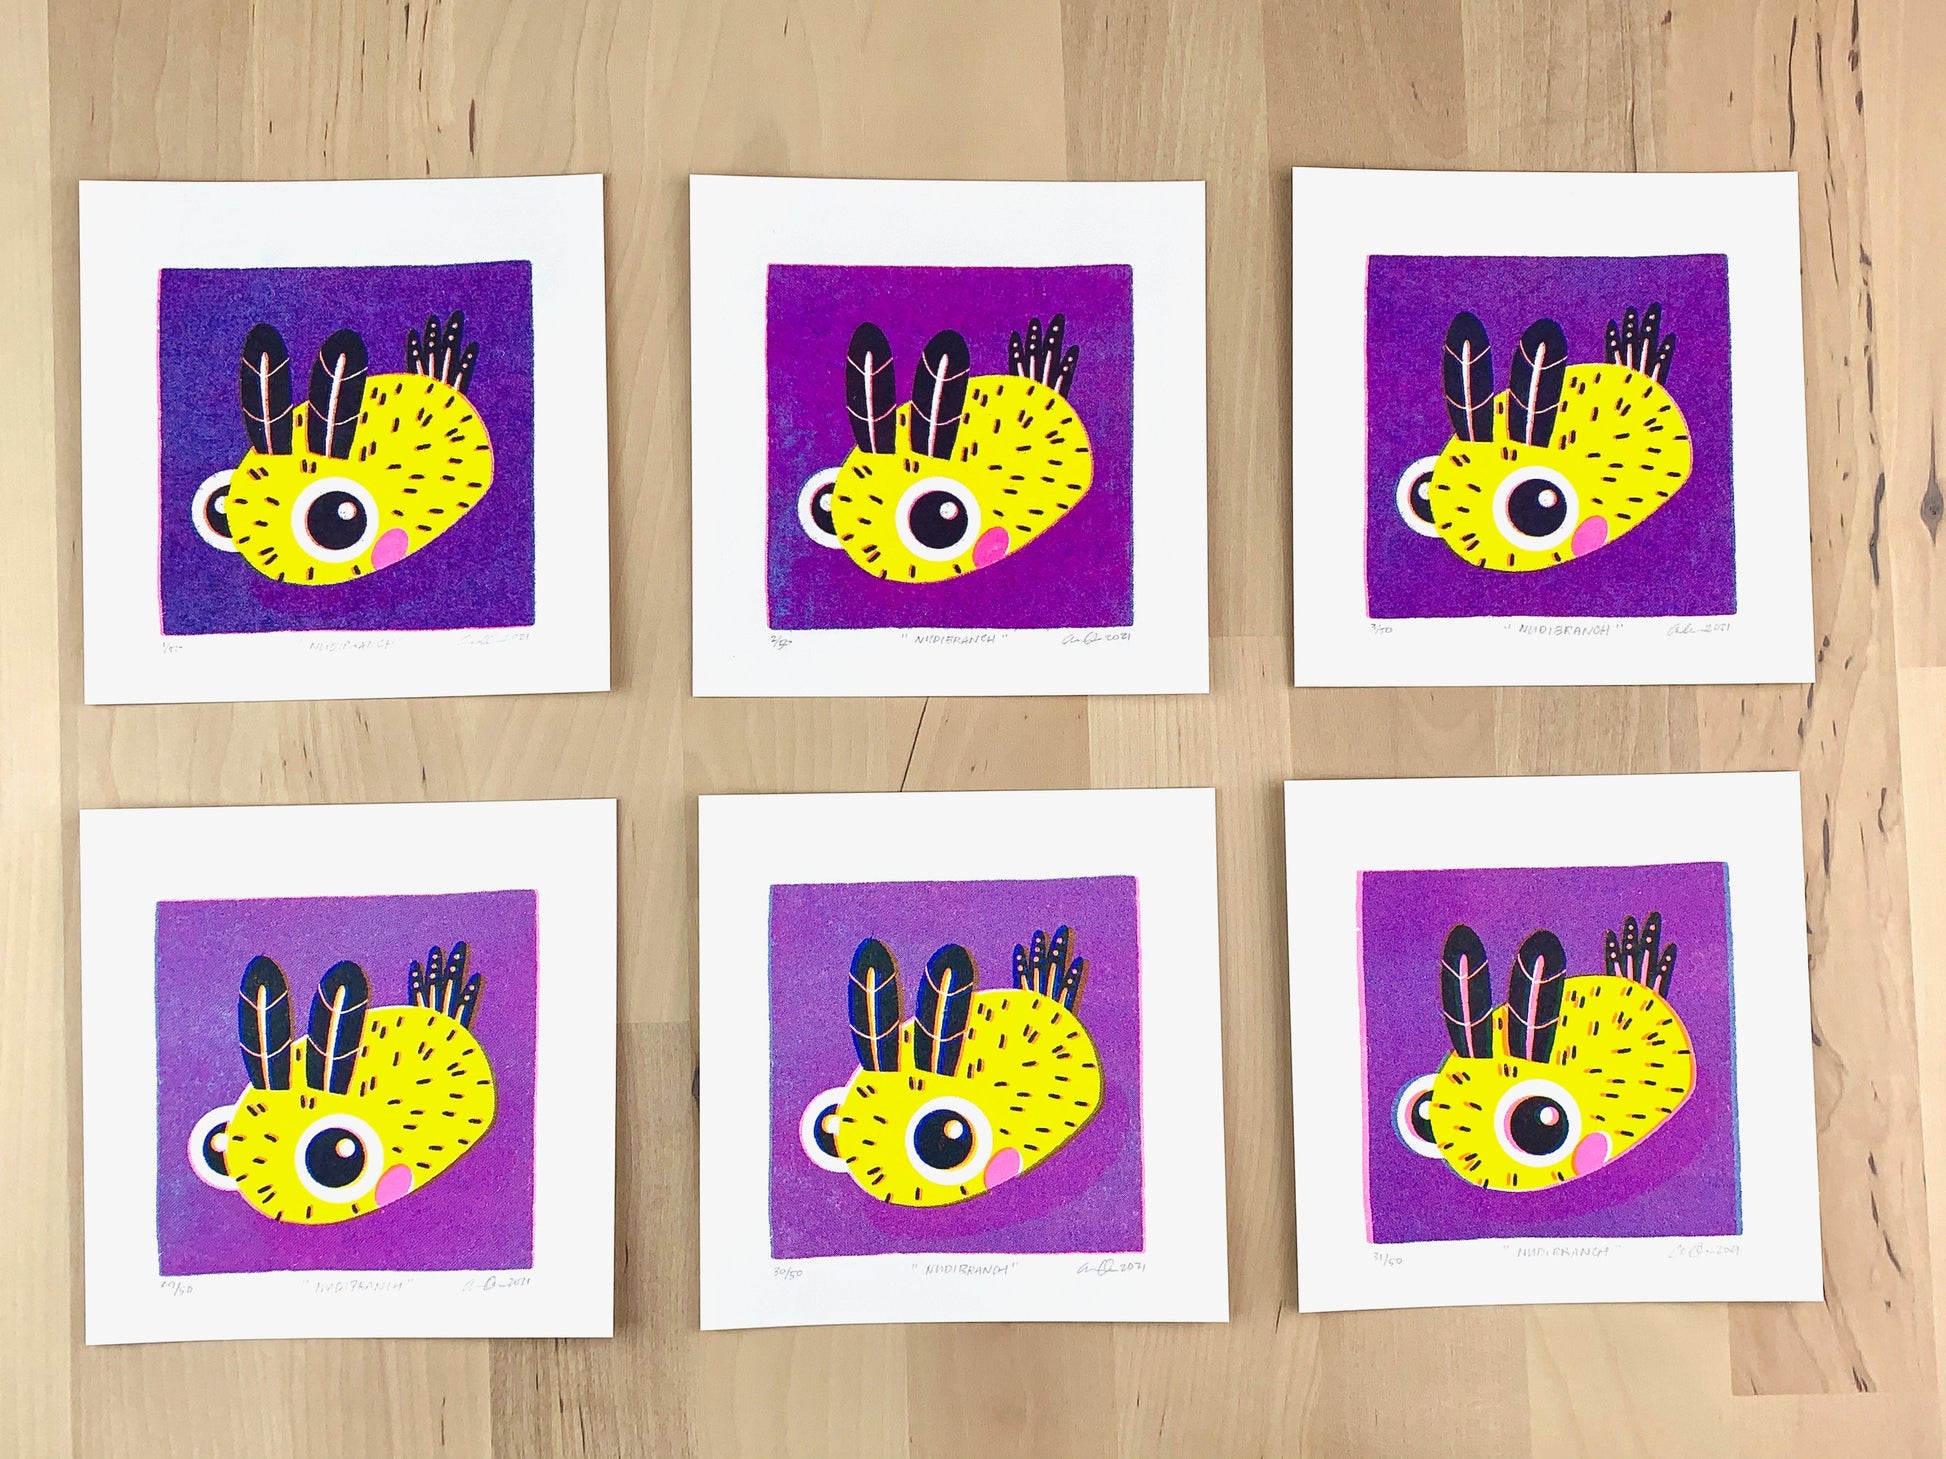 Six Risograph prints of a cute Risograph print of a cute nudibranch, sea bunny, illustration on a purple background showing the unique variations.